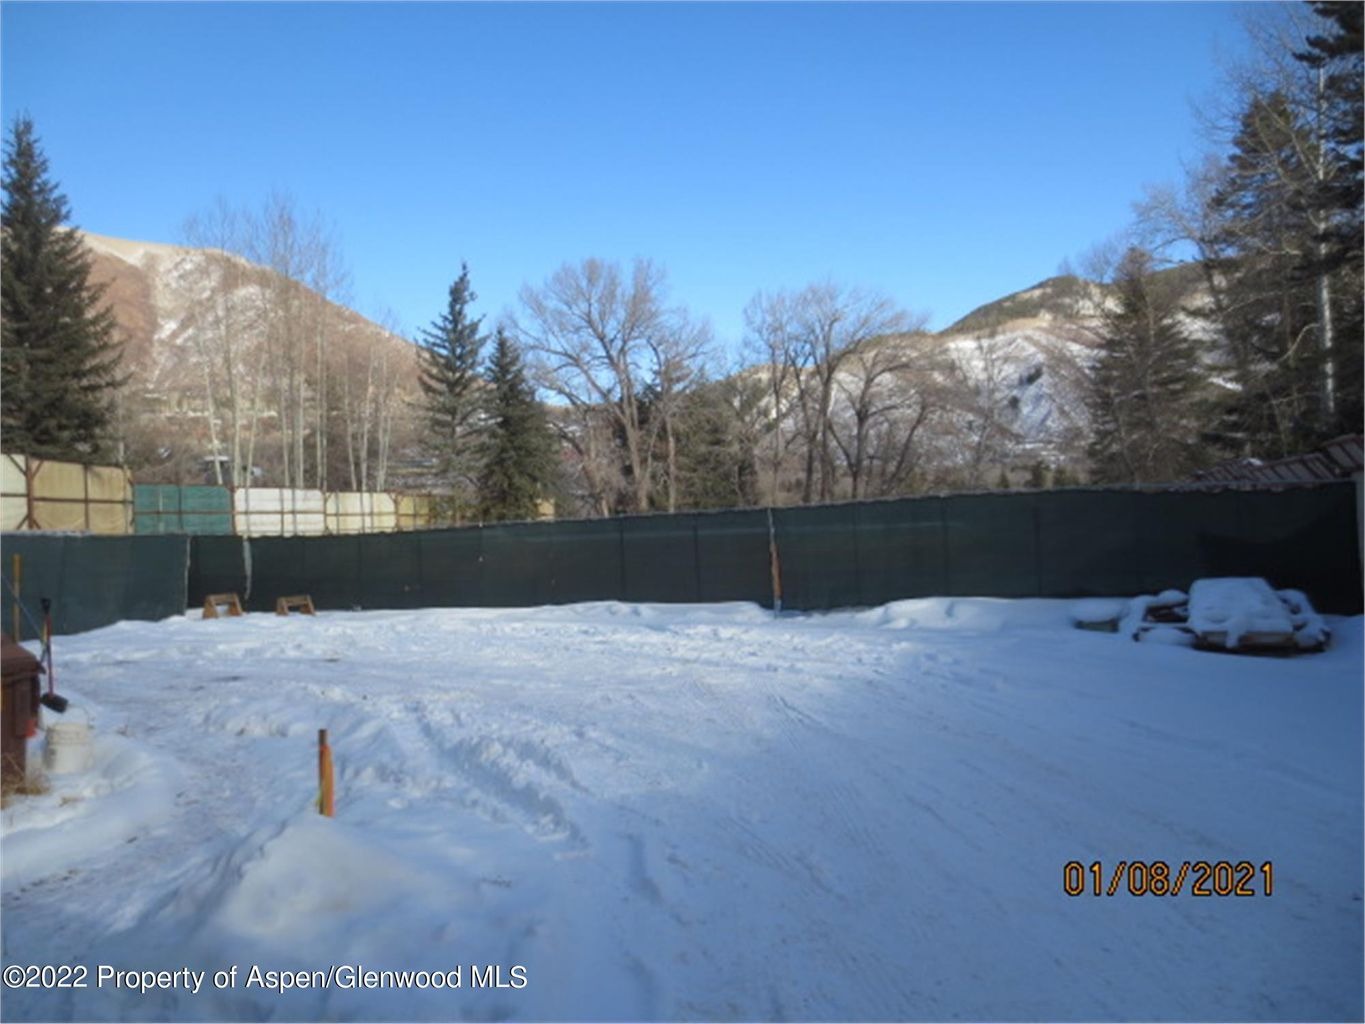 Two Vacant Lots at 350 & 360 Lake Ave in Aspen’s West End Sell for $30.8M Image